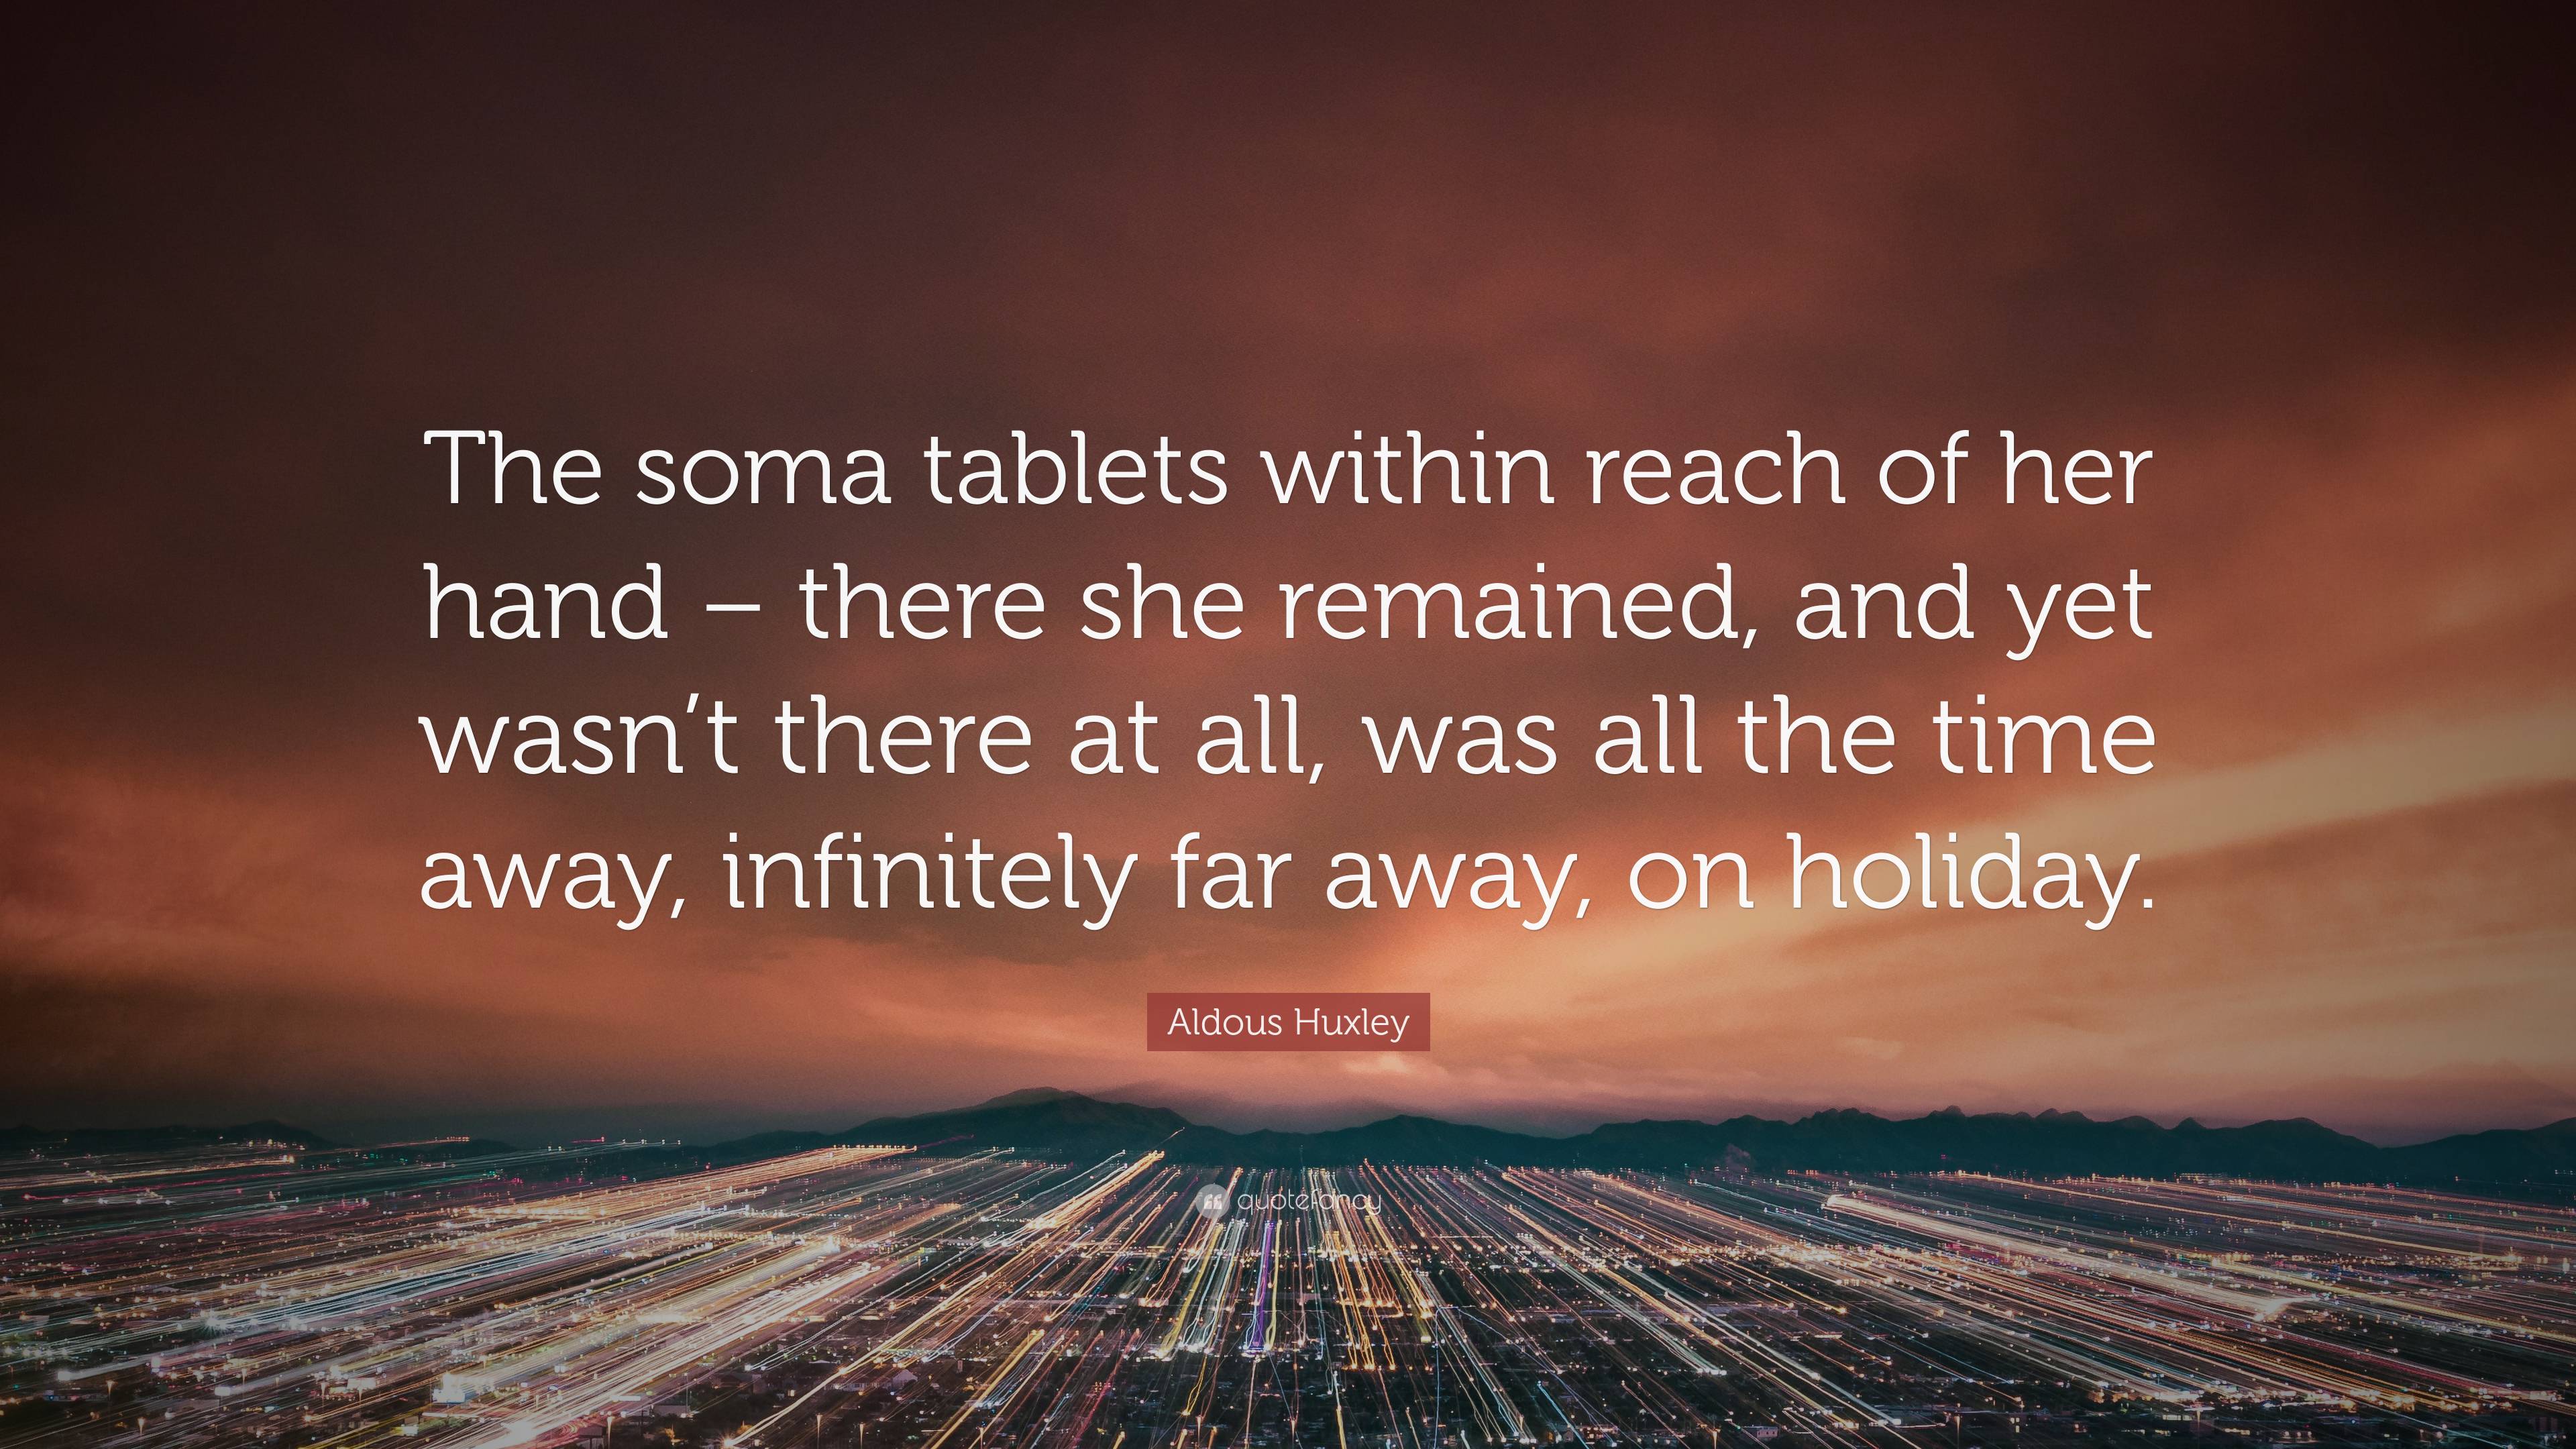 Aldous Huxley Quote: “The soma tablets within reach of her hand – there she  remained, and yet wasn't there at all, was all the time away, infi”